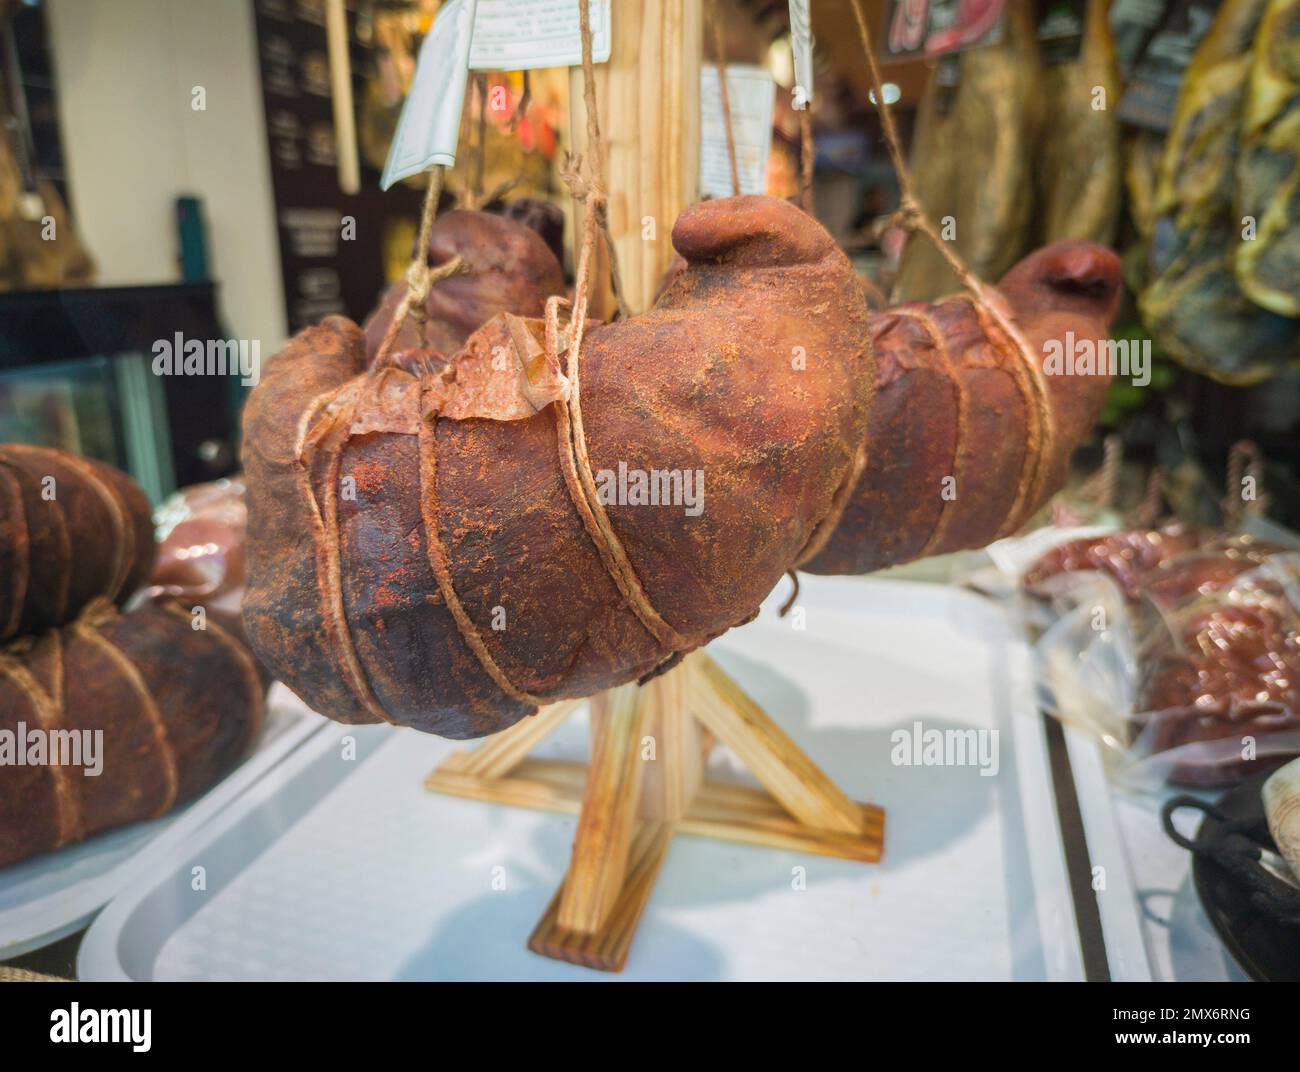 Extremaduran buche displayed at butchers shop. Pork stomach stuffed with ribs, tail, tongue and snout. Stock Photo